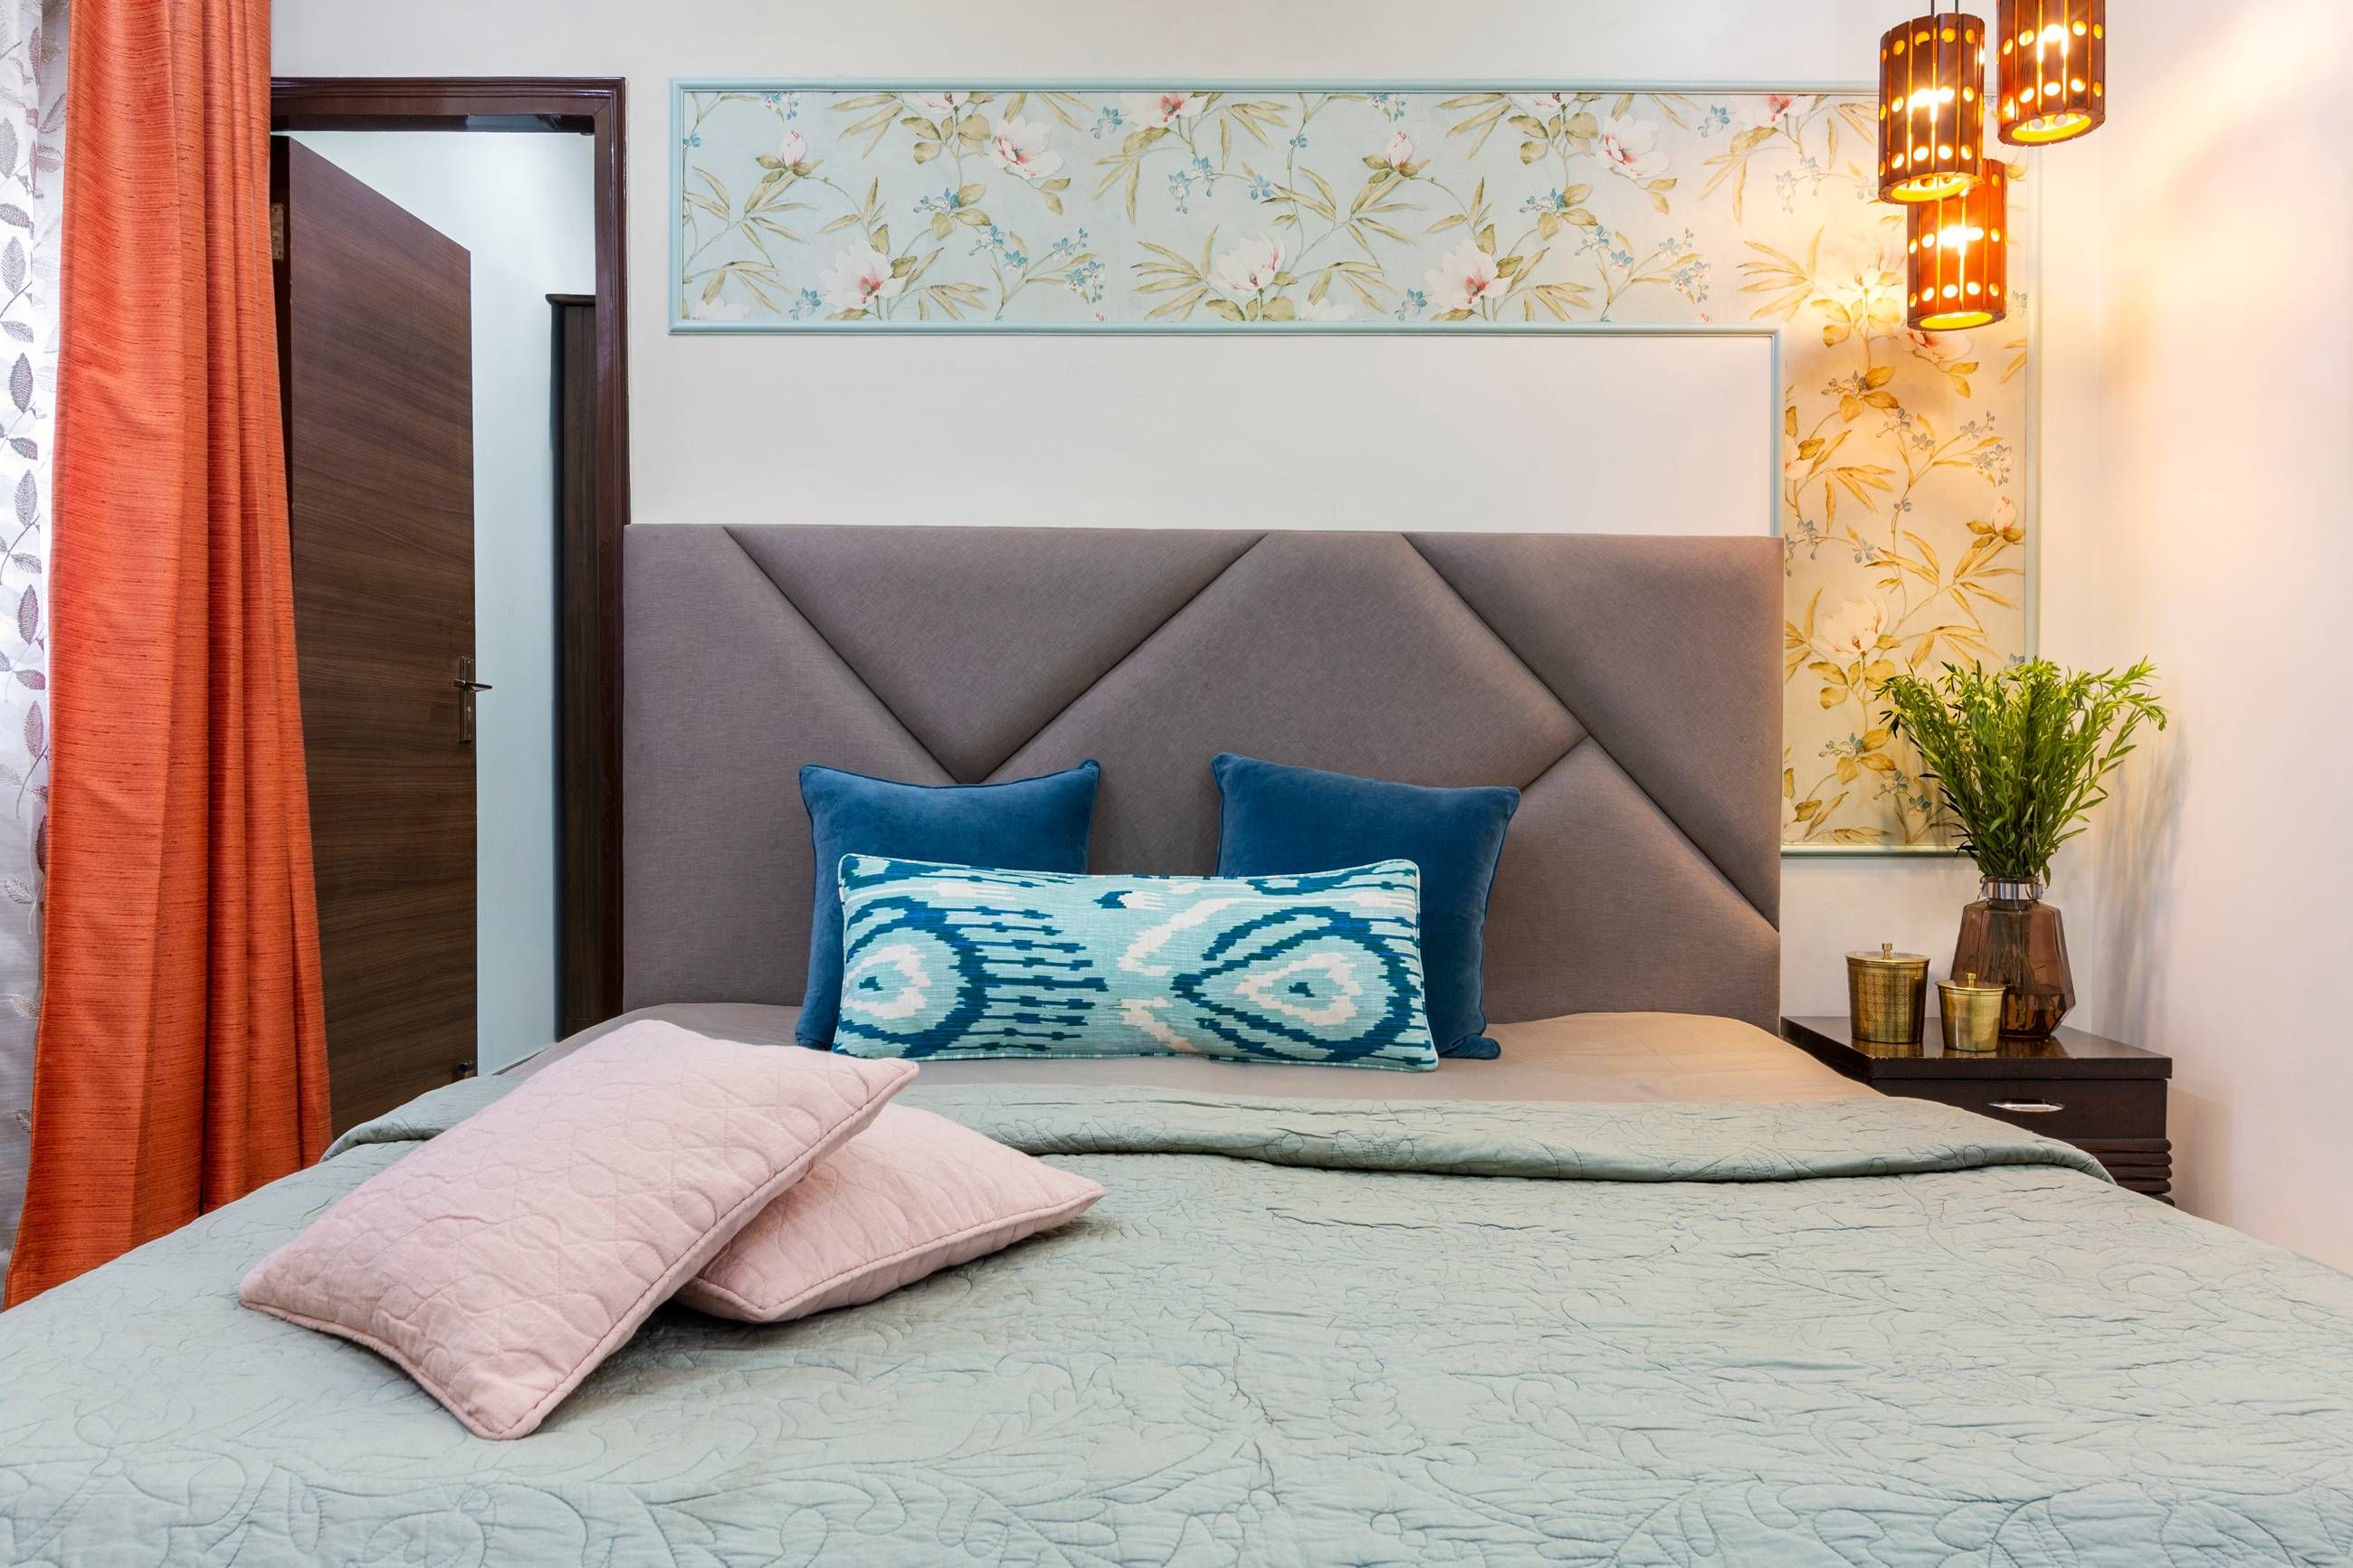 Modern Guest Room Design With Grey Tufted Headboard